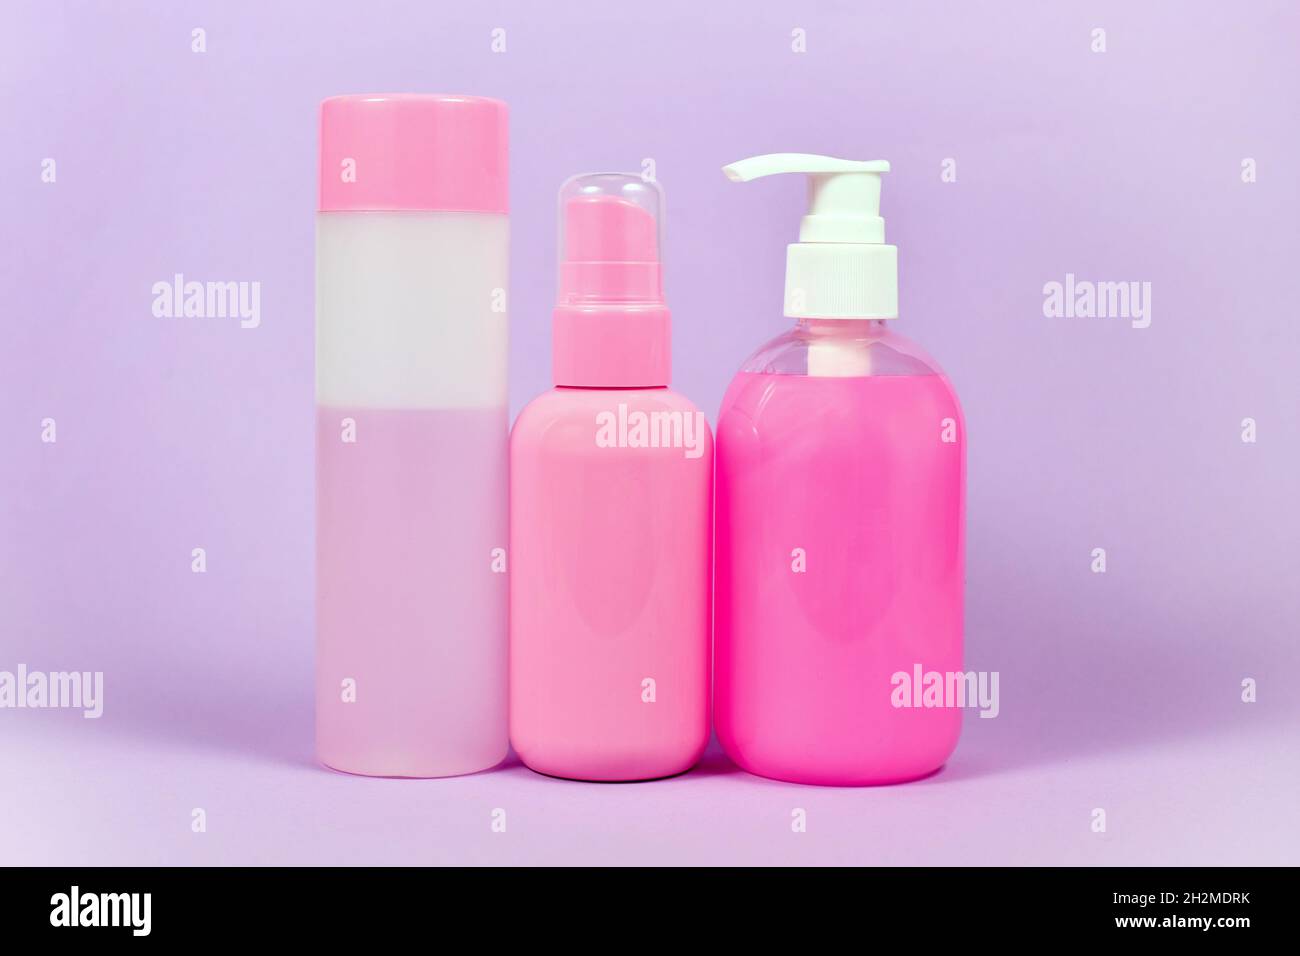 Stereotype pink colored hygiene products marketed to women Stock Photo